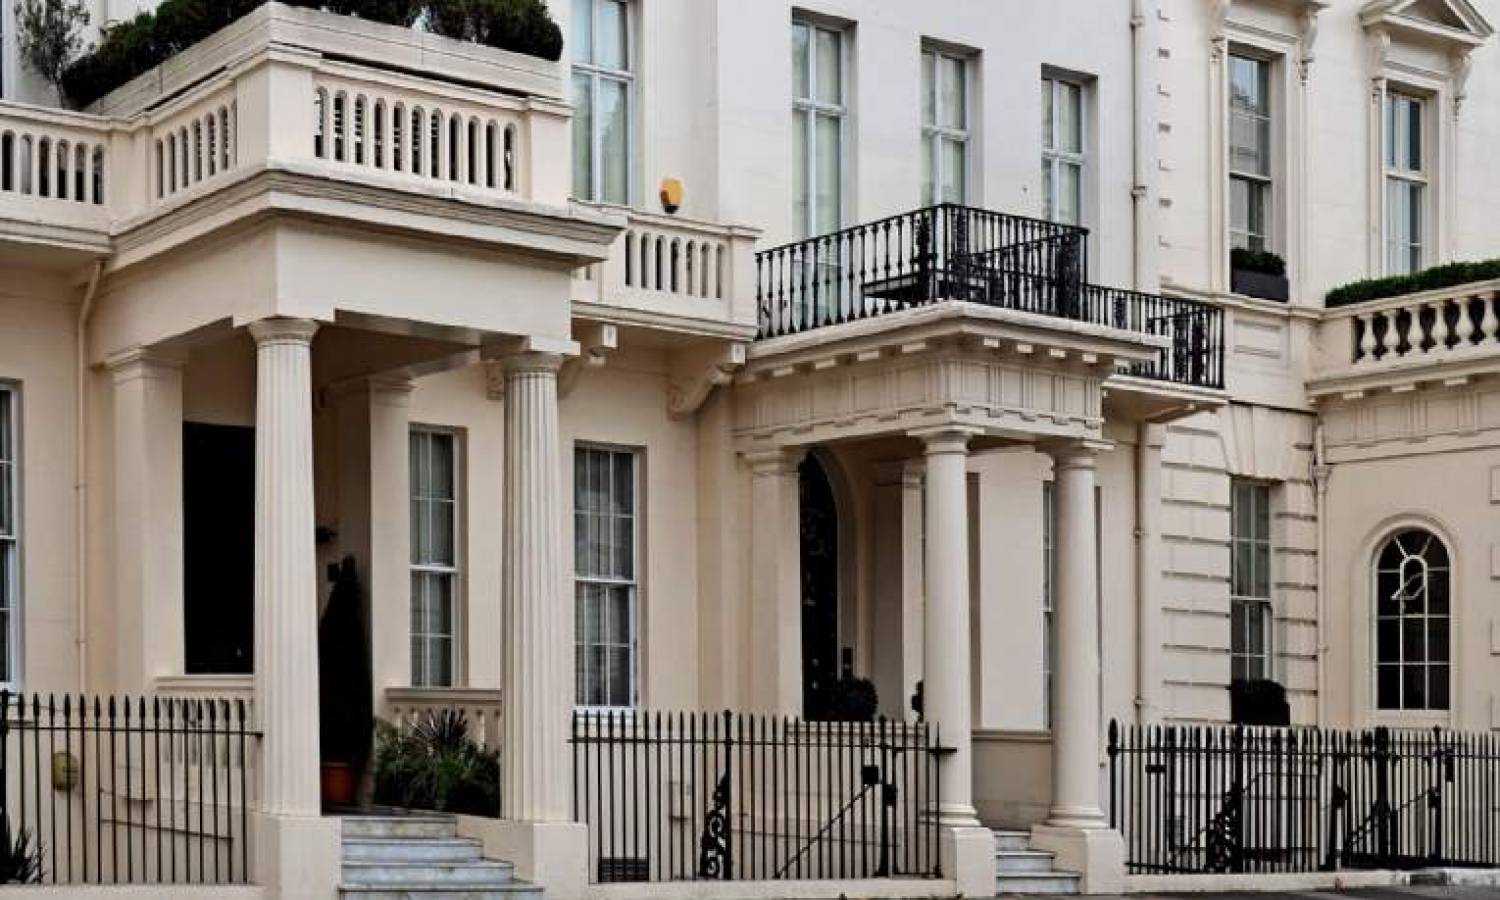 Prices in Prime Central London have fallen 17%